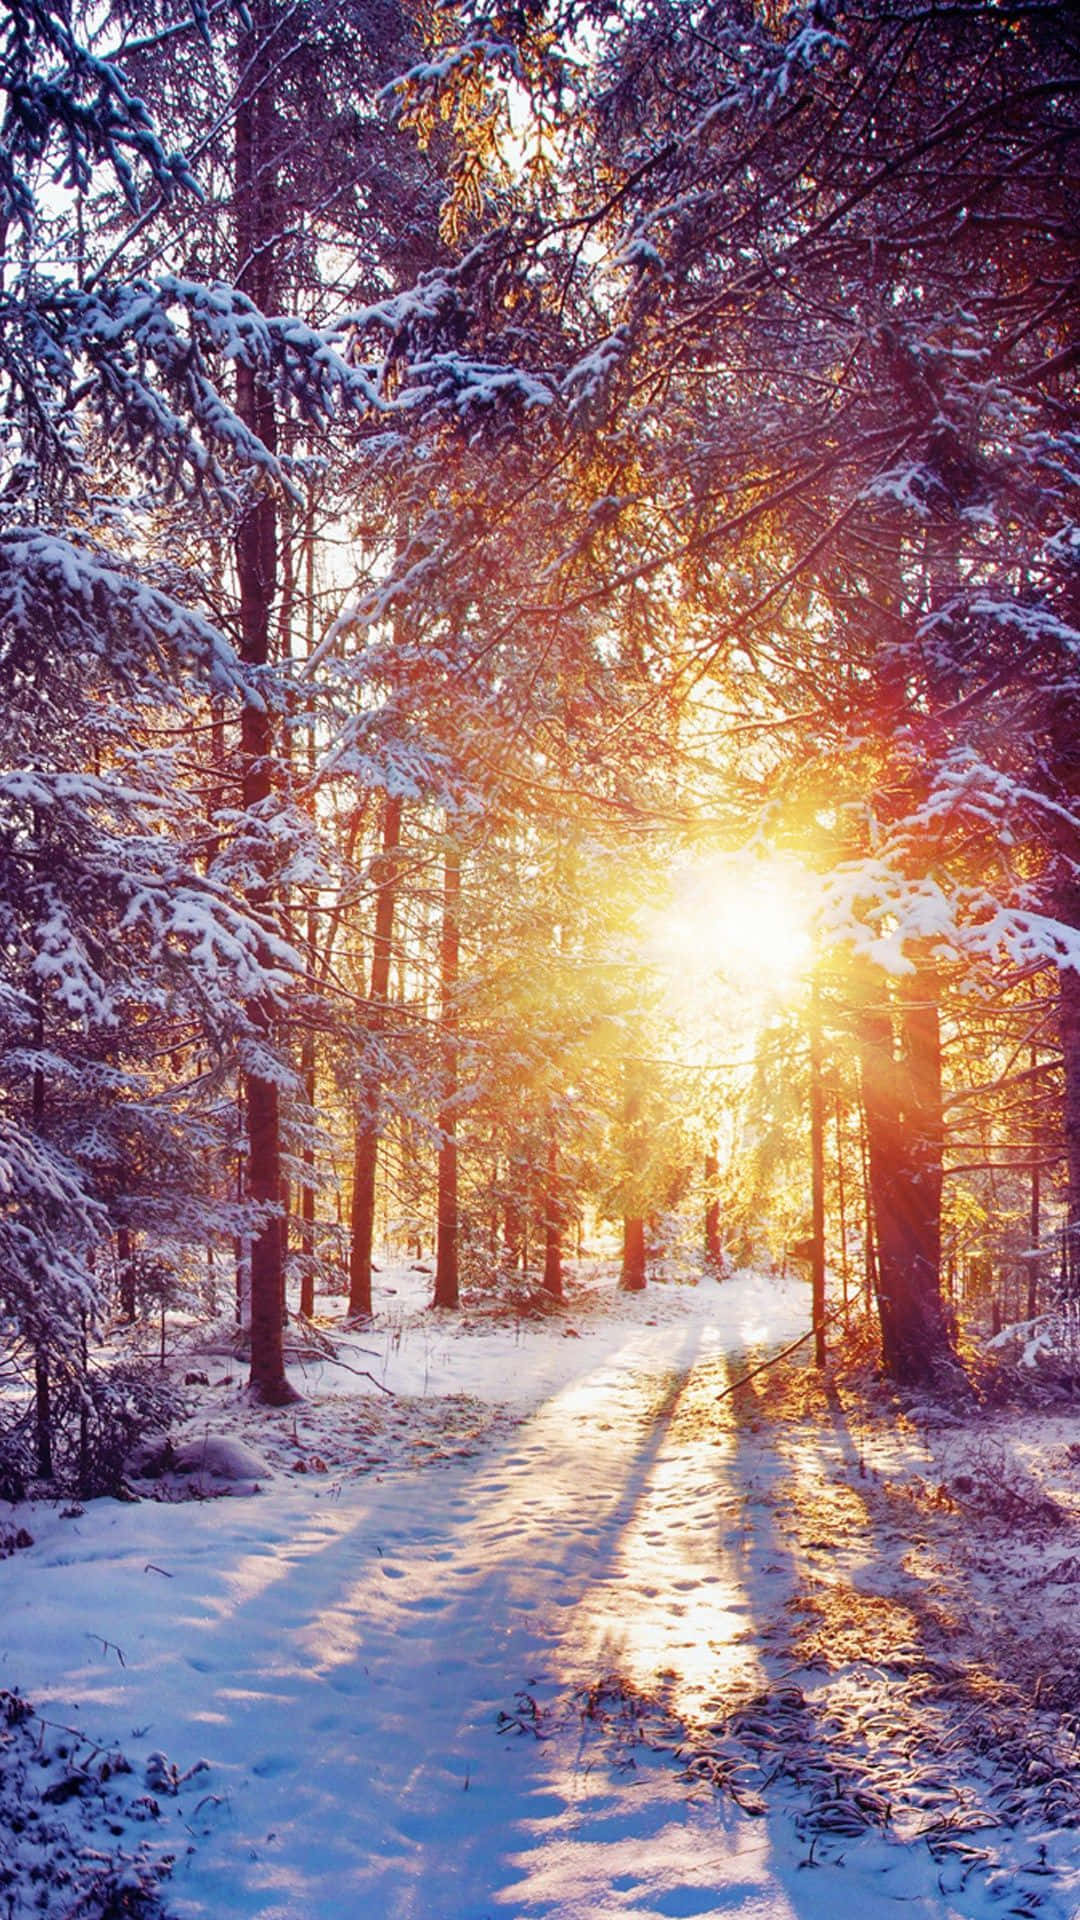 A Snowy Forest With The Sun Shining Through The Trees Wallpaper